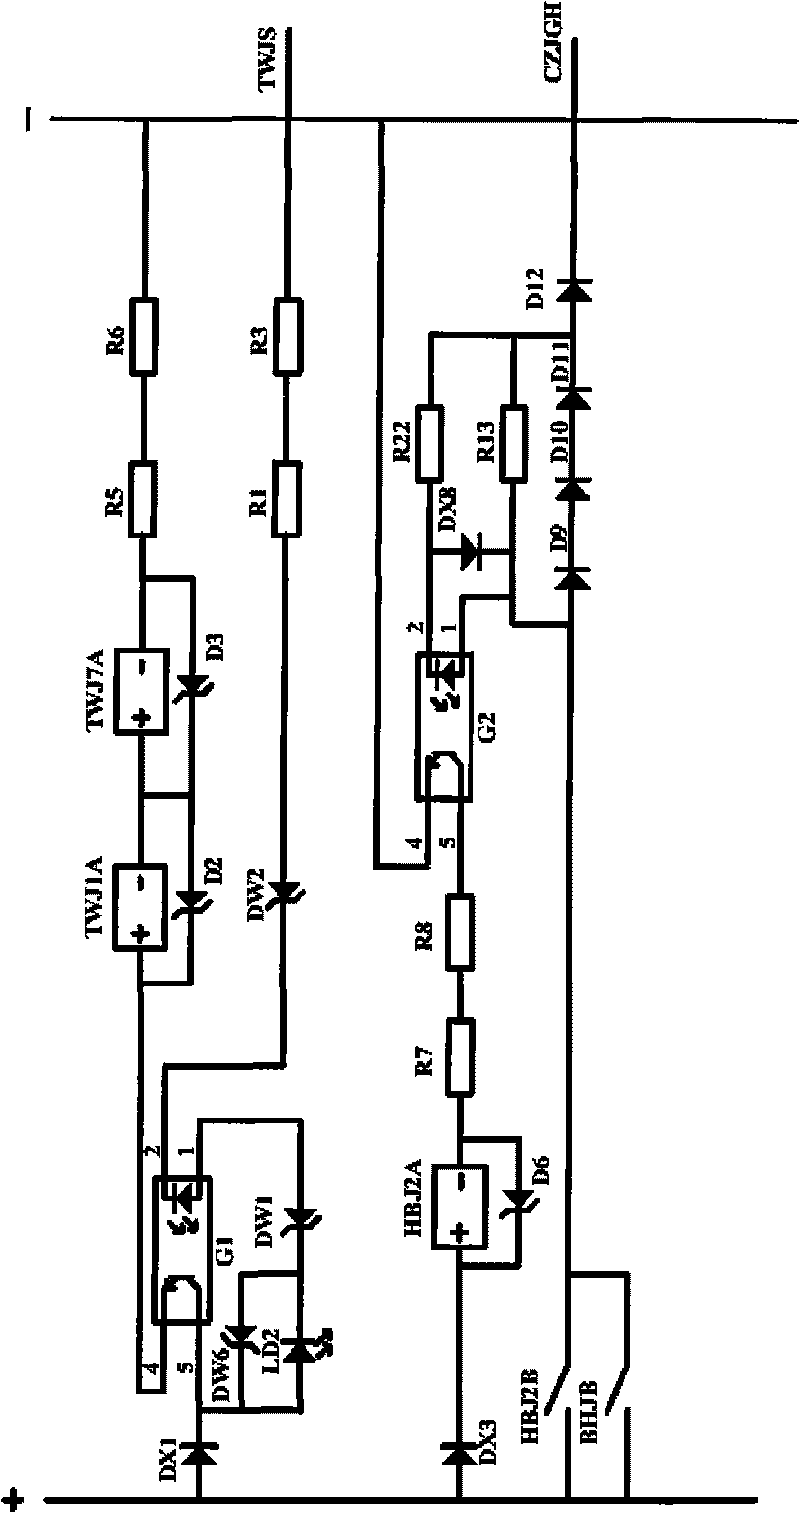 Full-adaptive high-voltage switch controller based on light-coupled control